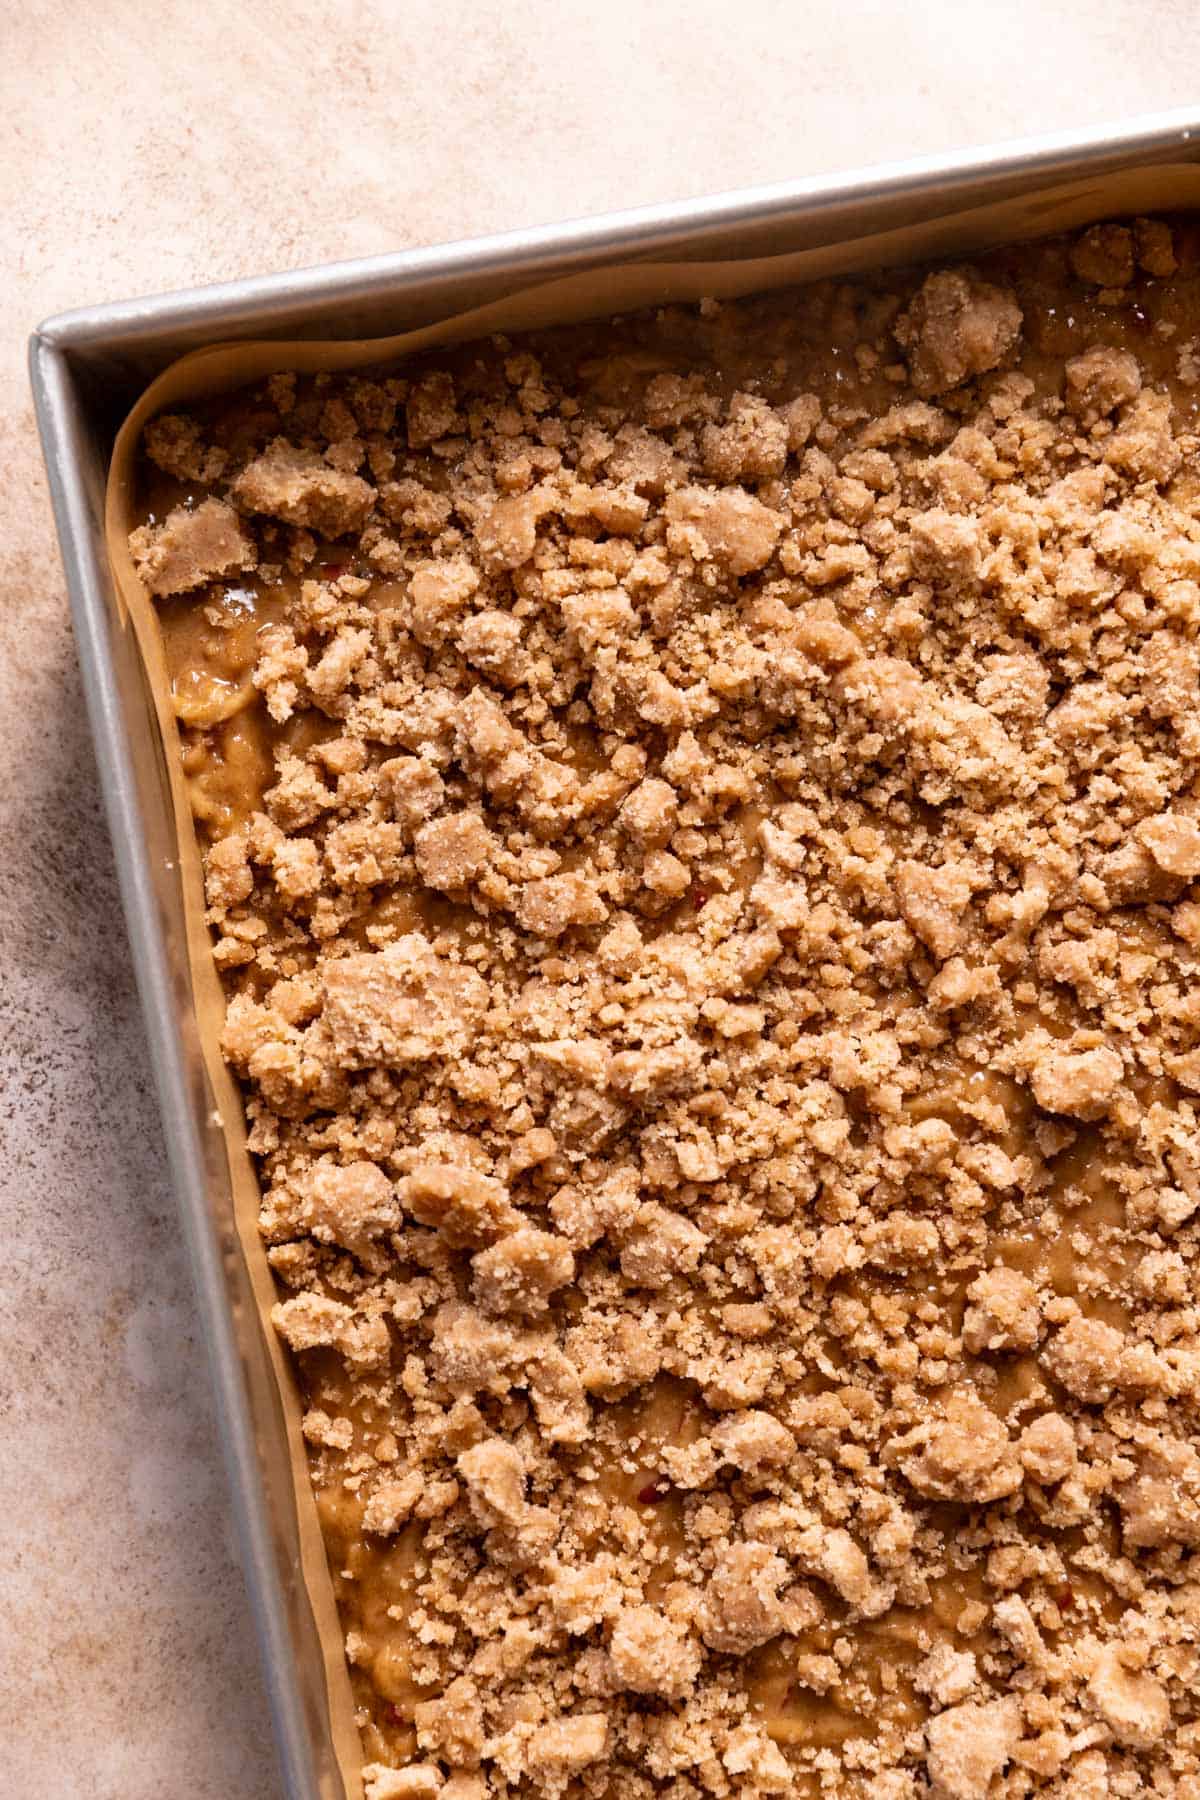 A baking pan with the apple cake batter and cinnamon crumbs on top before baking.